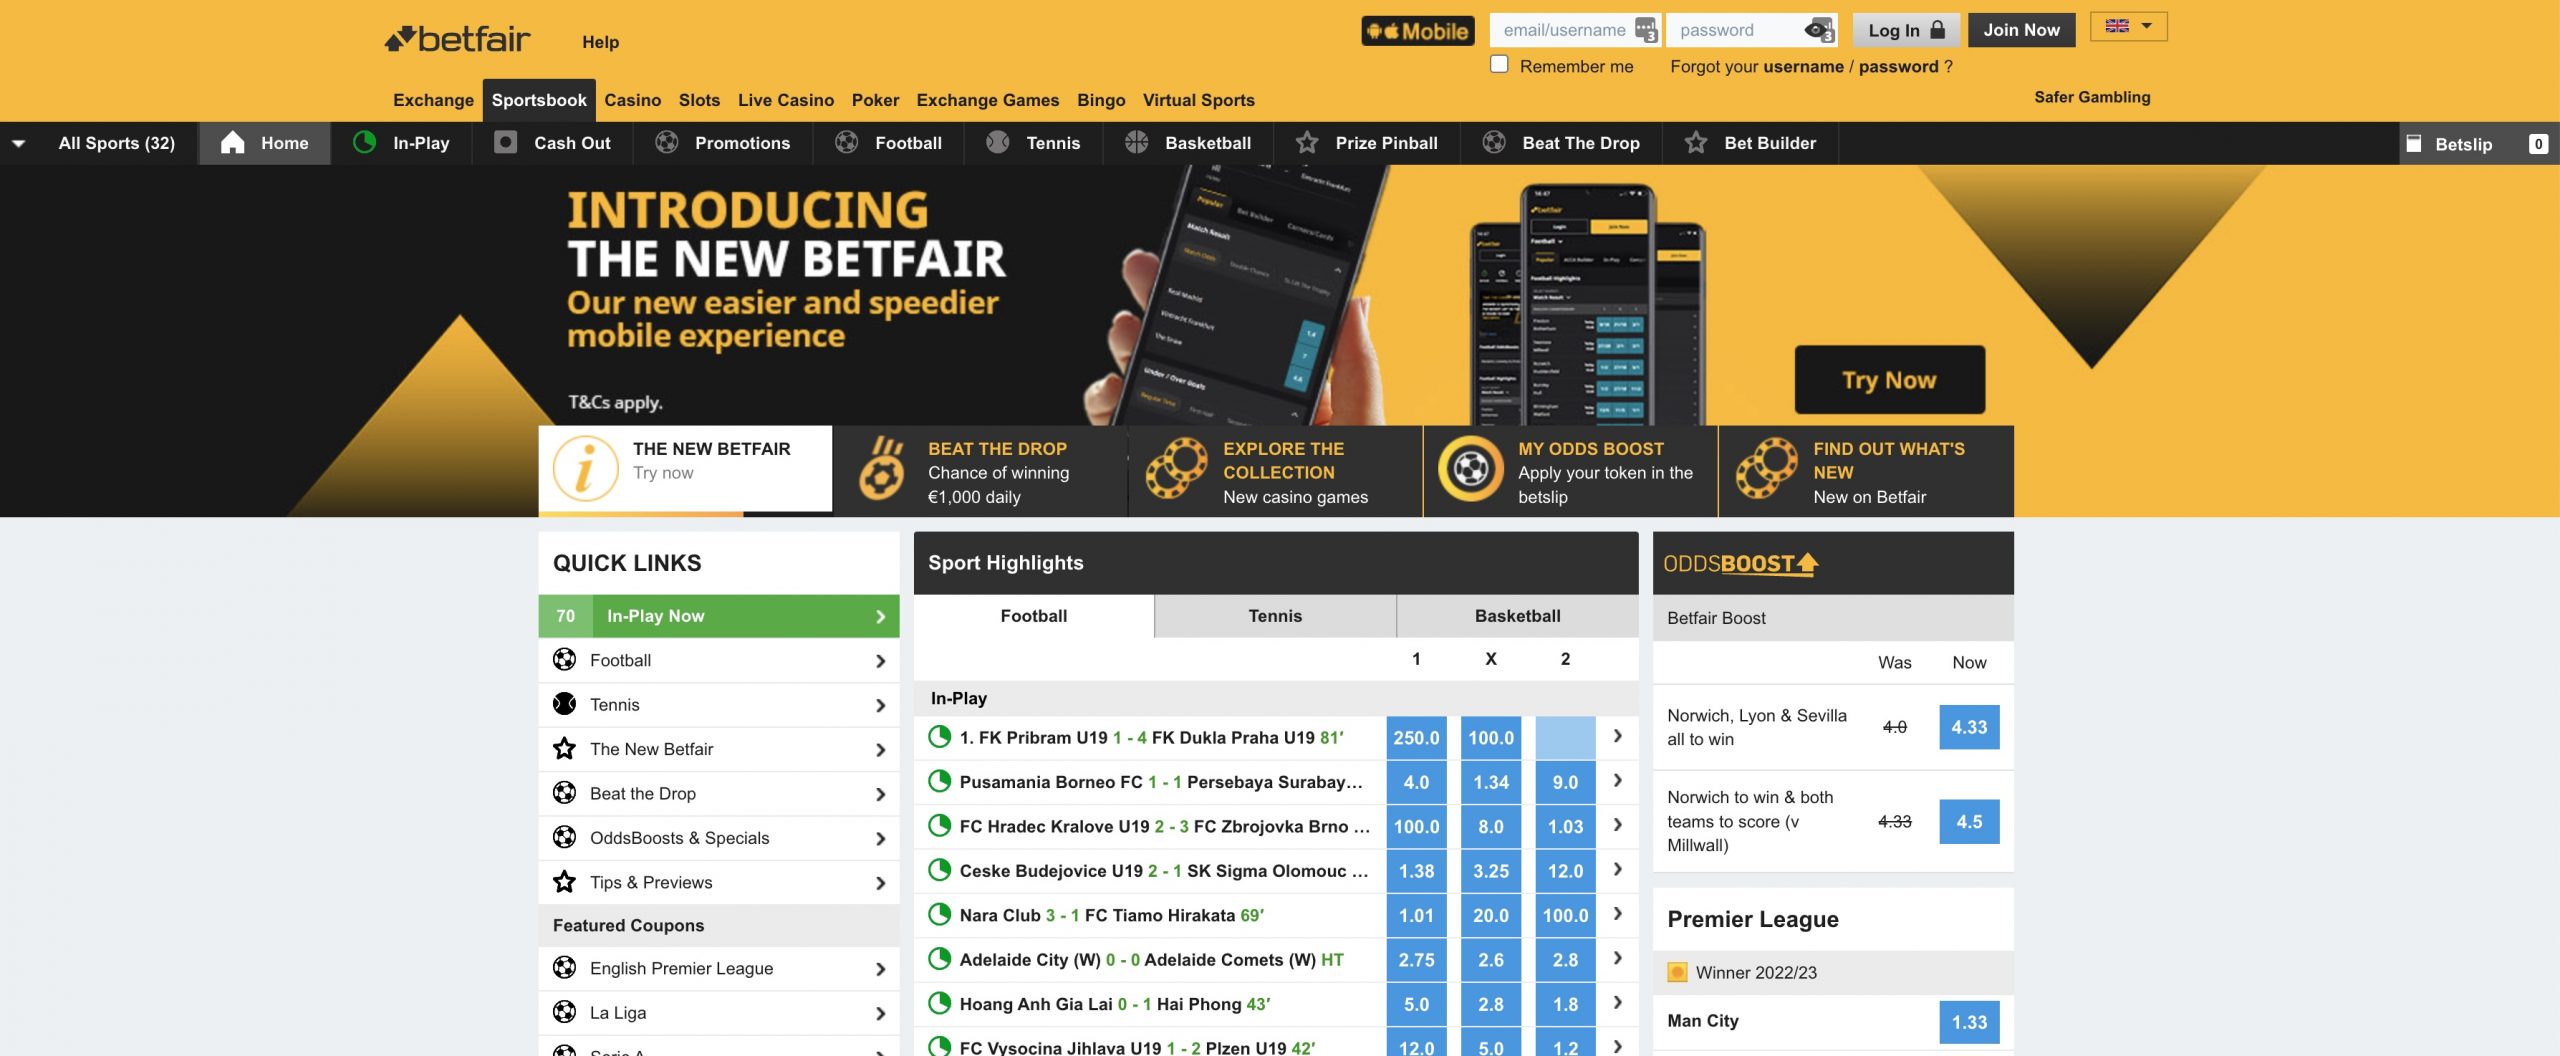 Betfair Sports Review - 7 things to know before betting